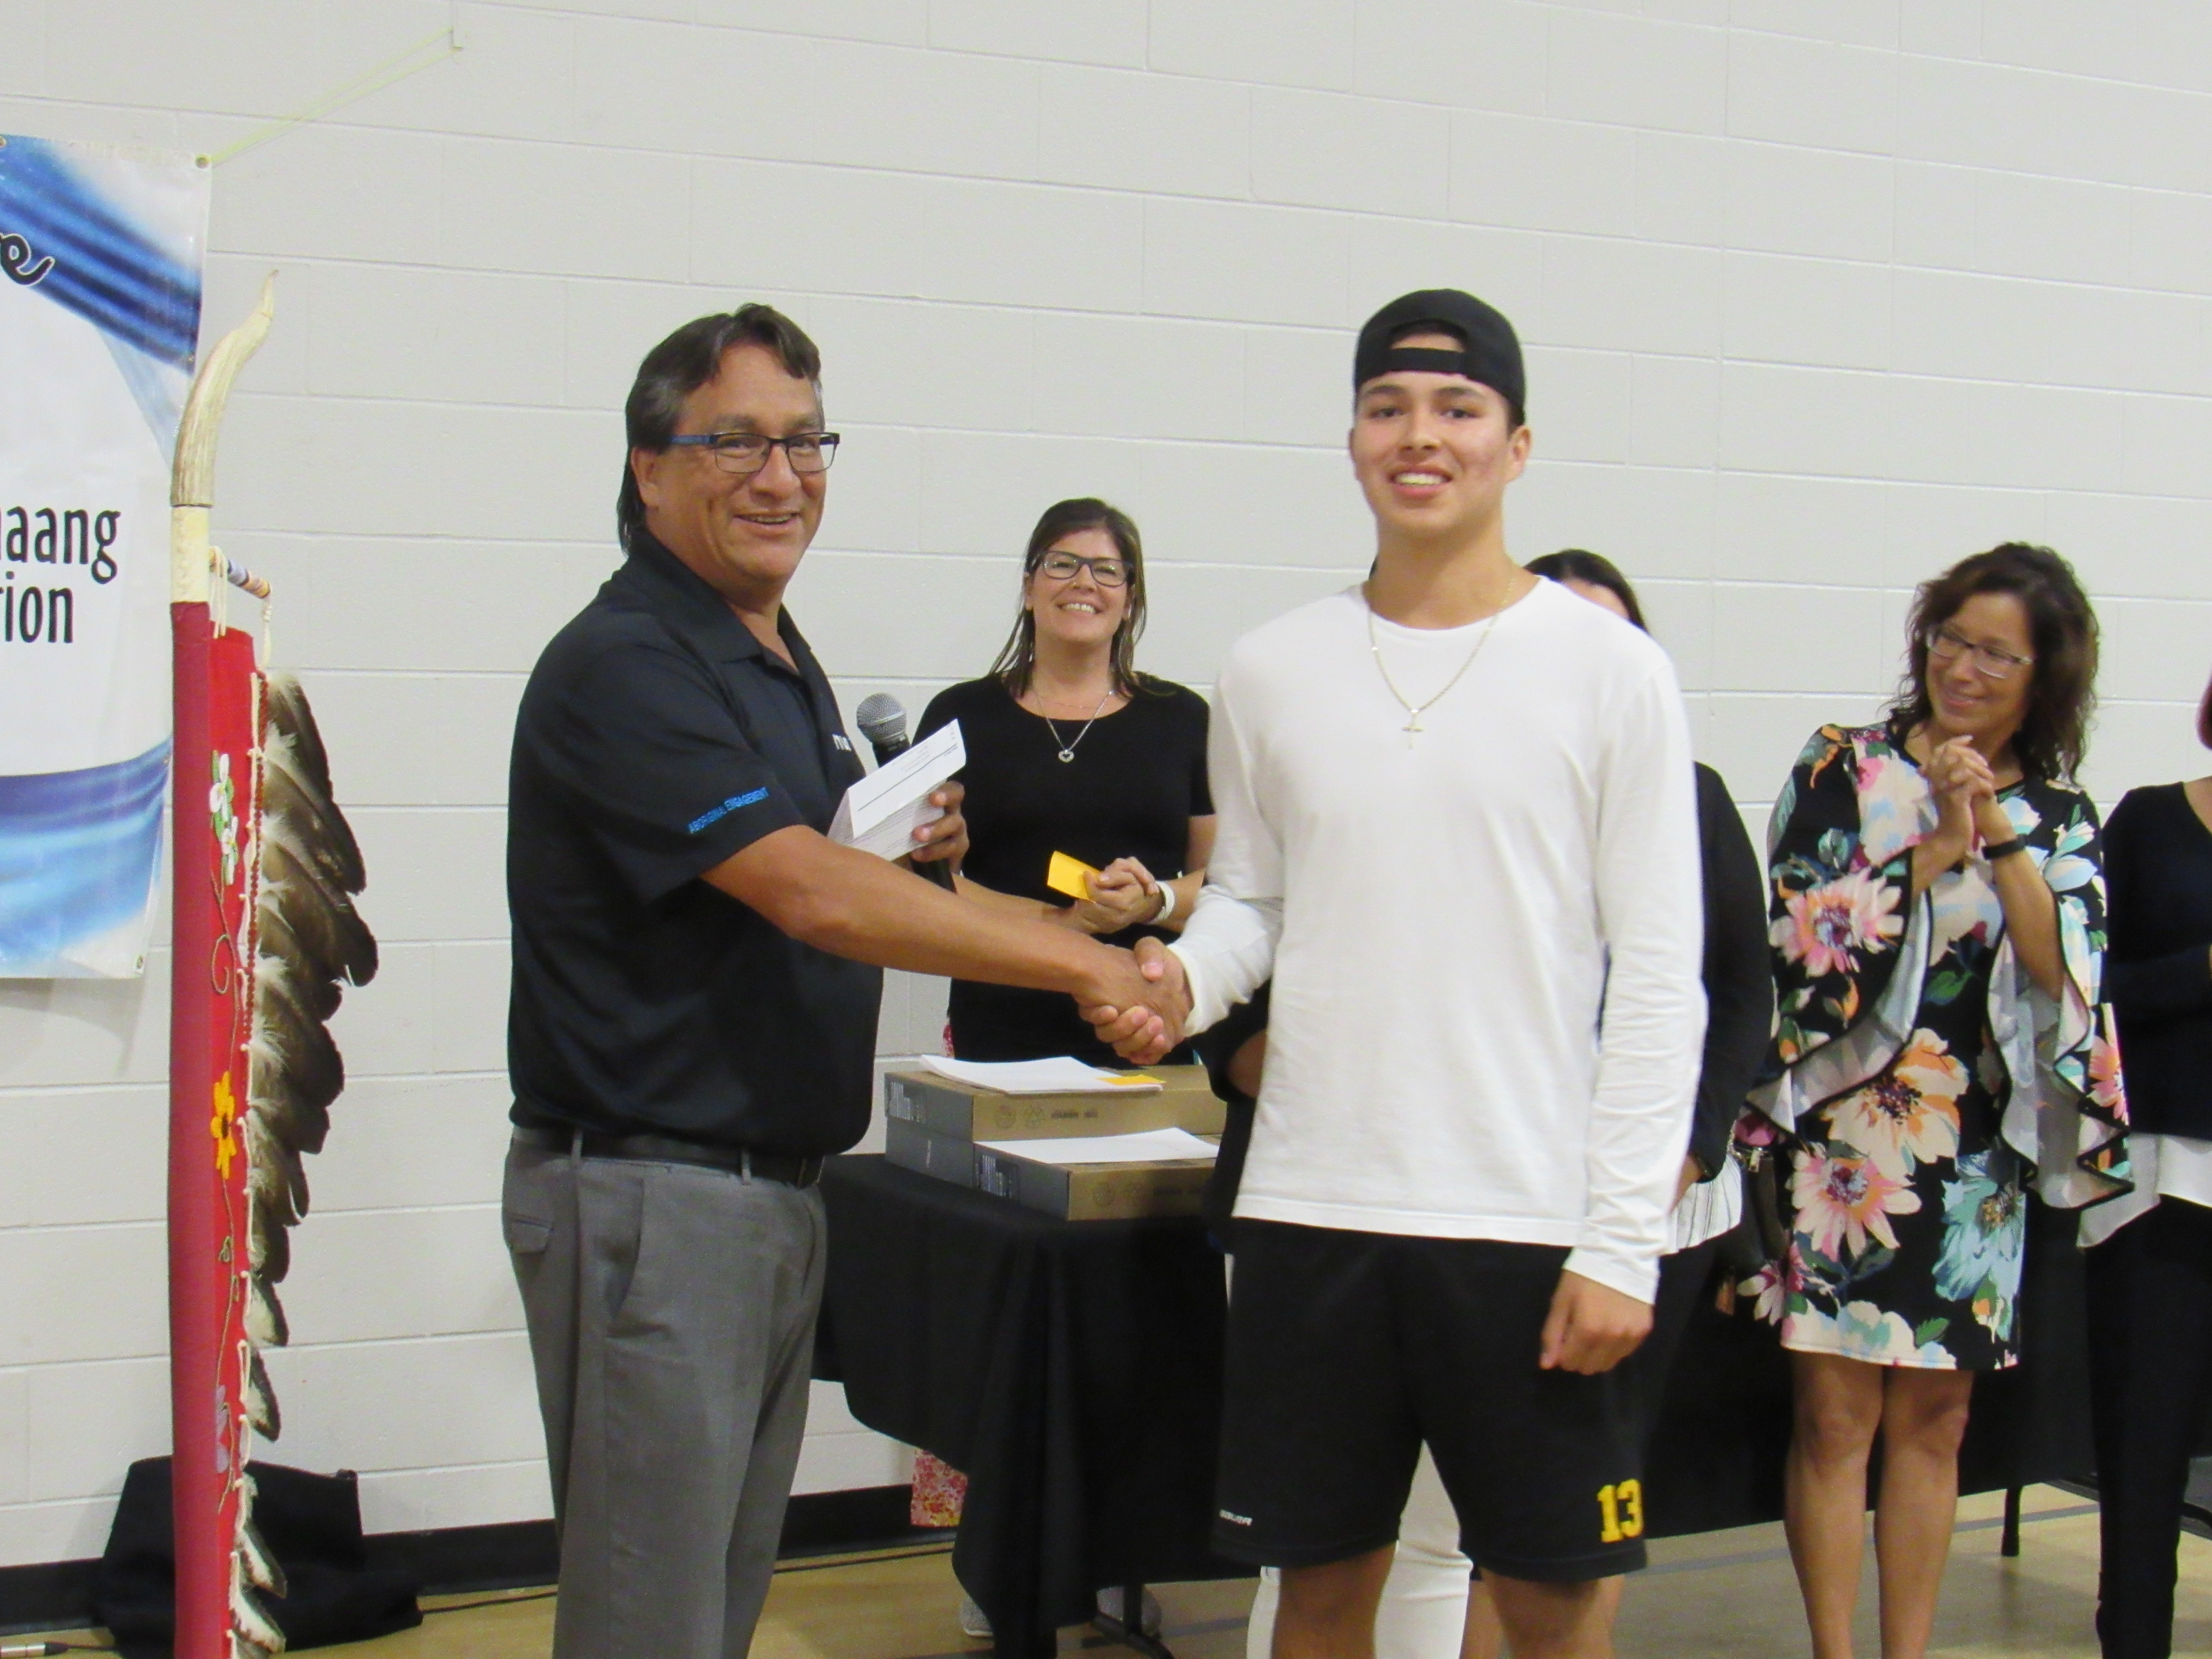 Greg Plain, Senior Engagement Advisor for southern Ontario at the NWMO, awards a scholarship to Great Lakes Secondary School student Levi Plain.